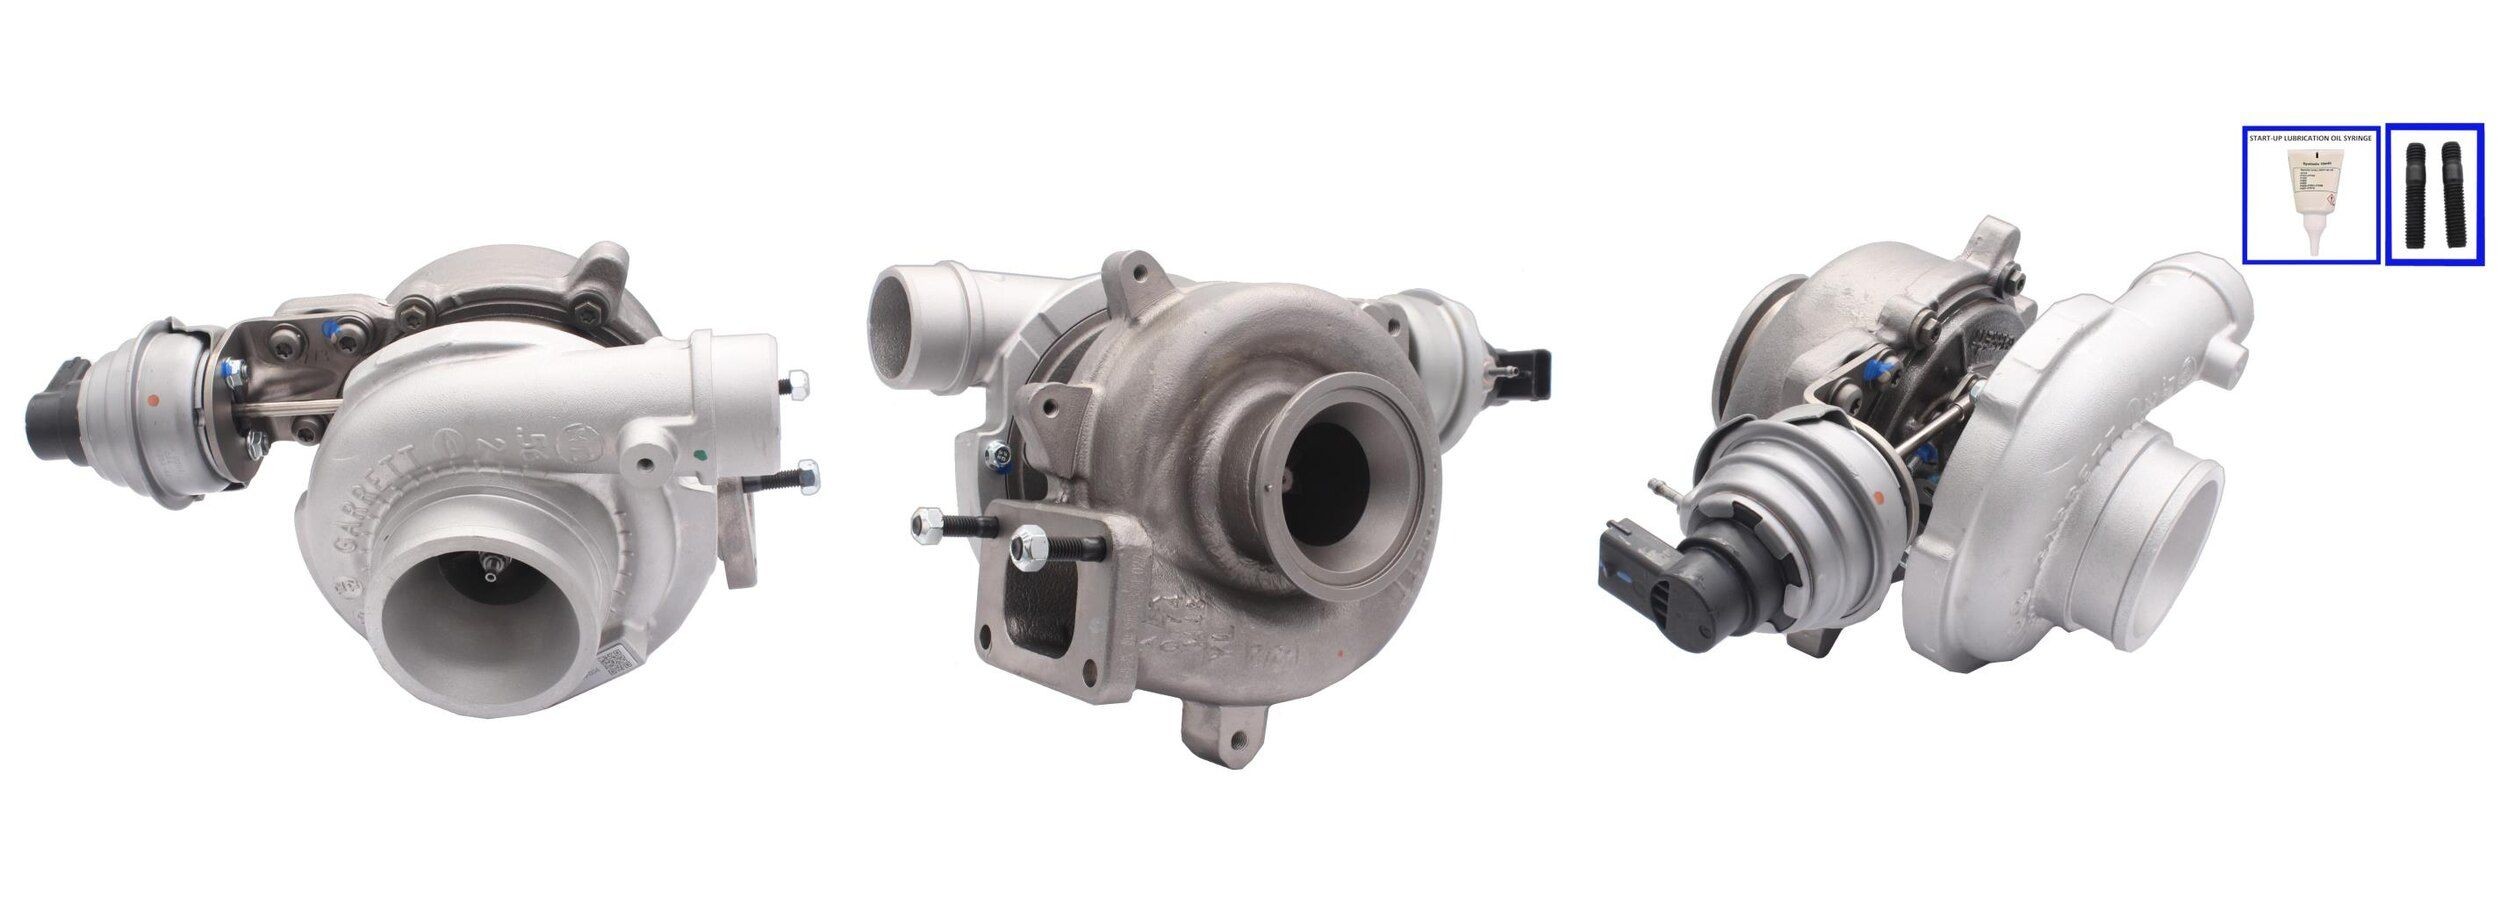 ELSTOCK 91-2068 Turbocharger Exhaust Turbocharger, with linear position sensor (LPS), without gaskets/seals